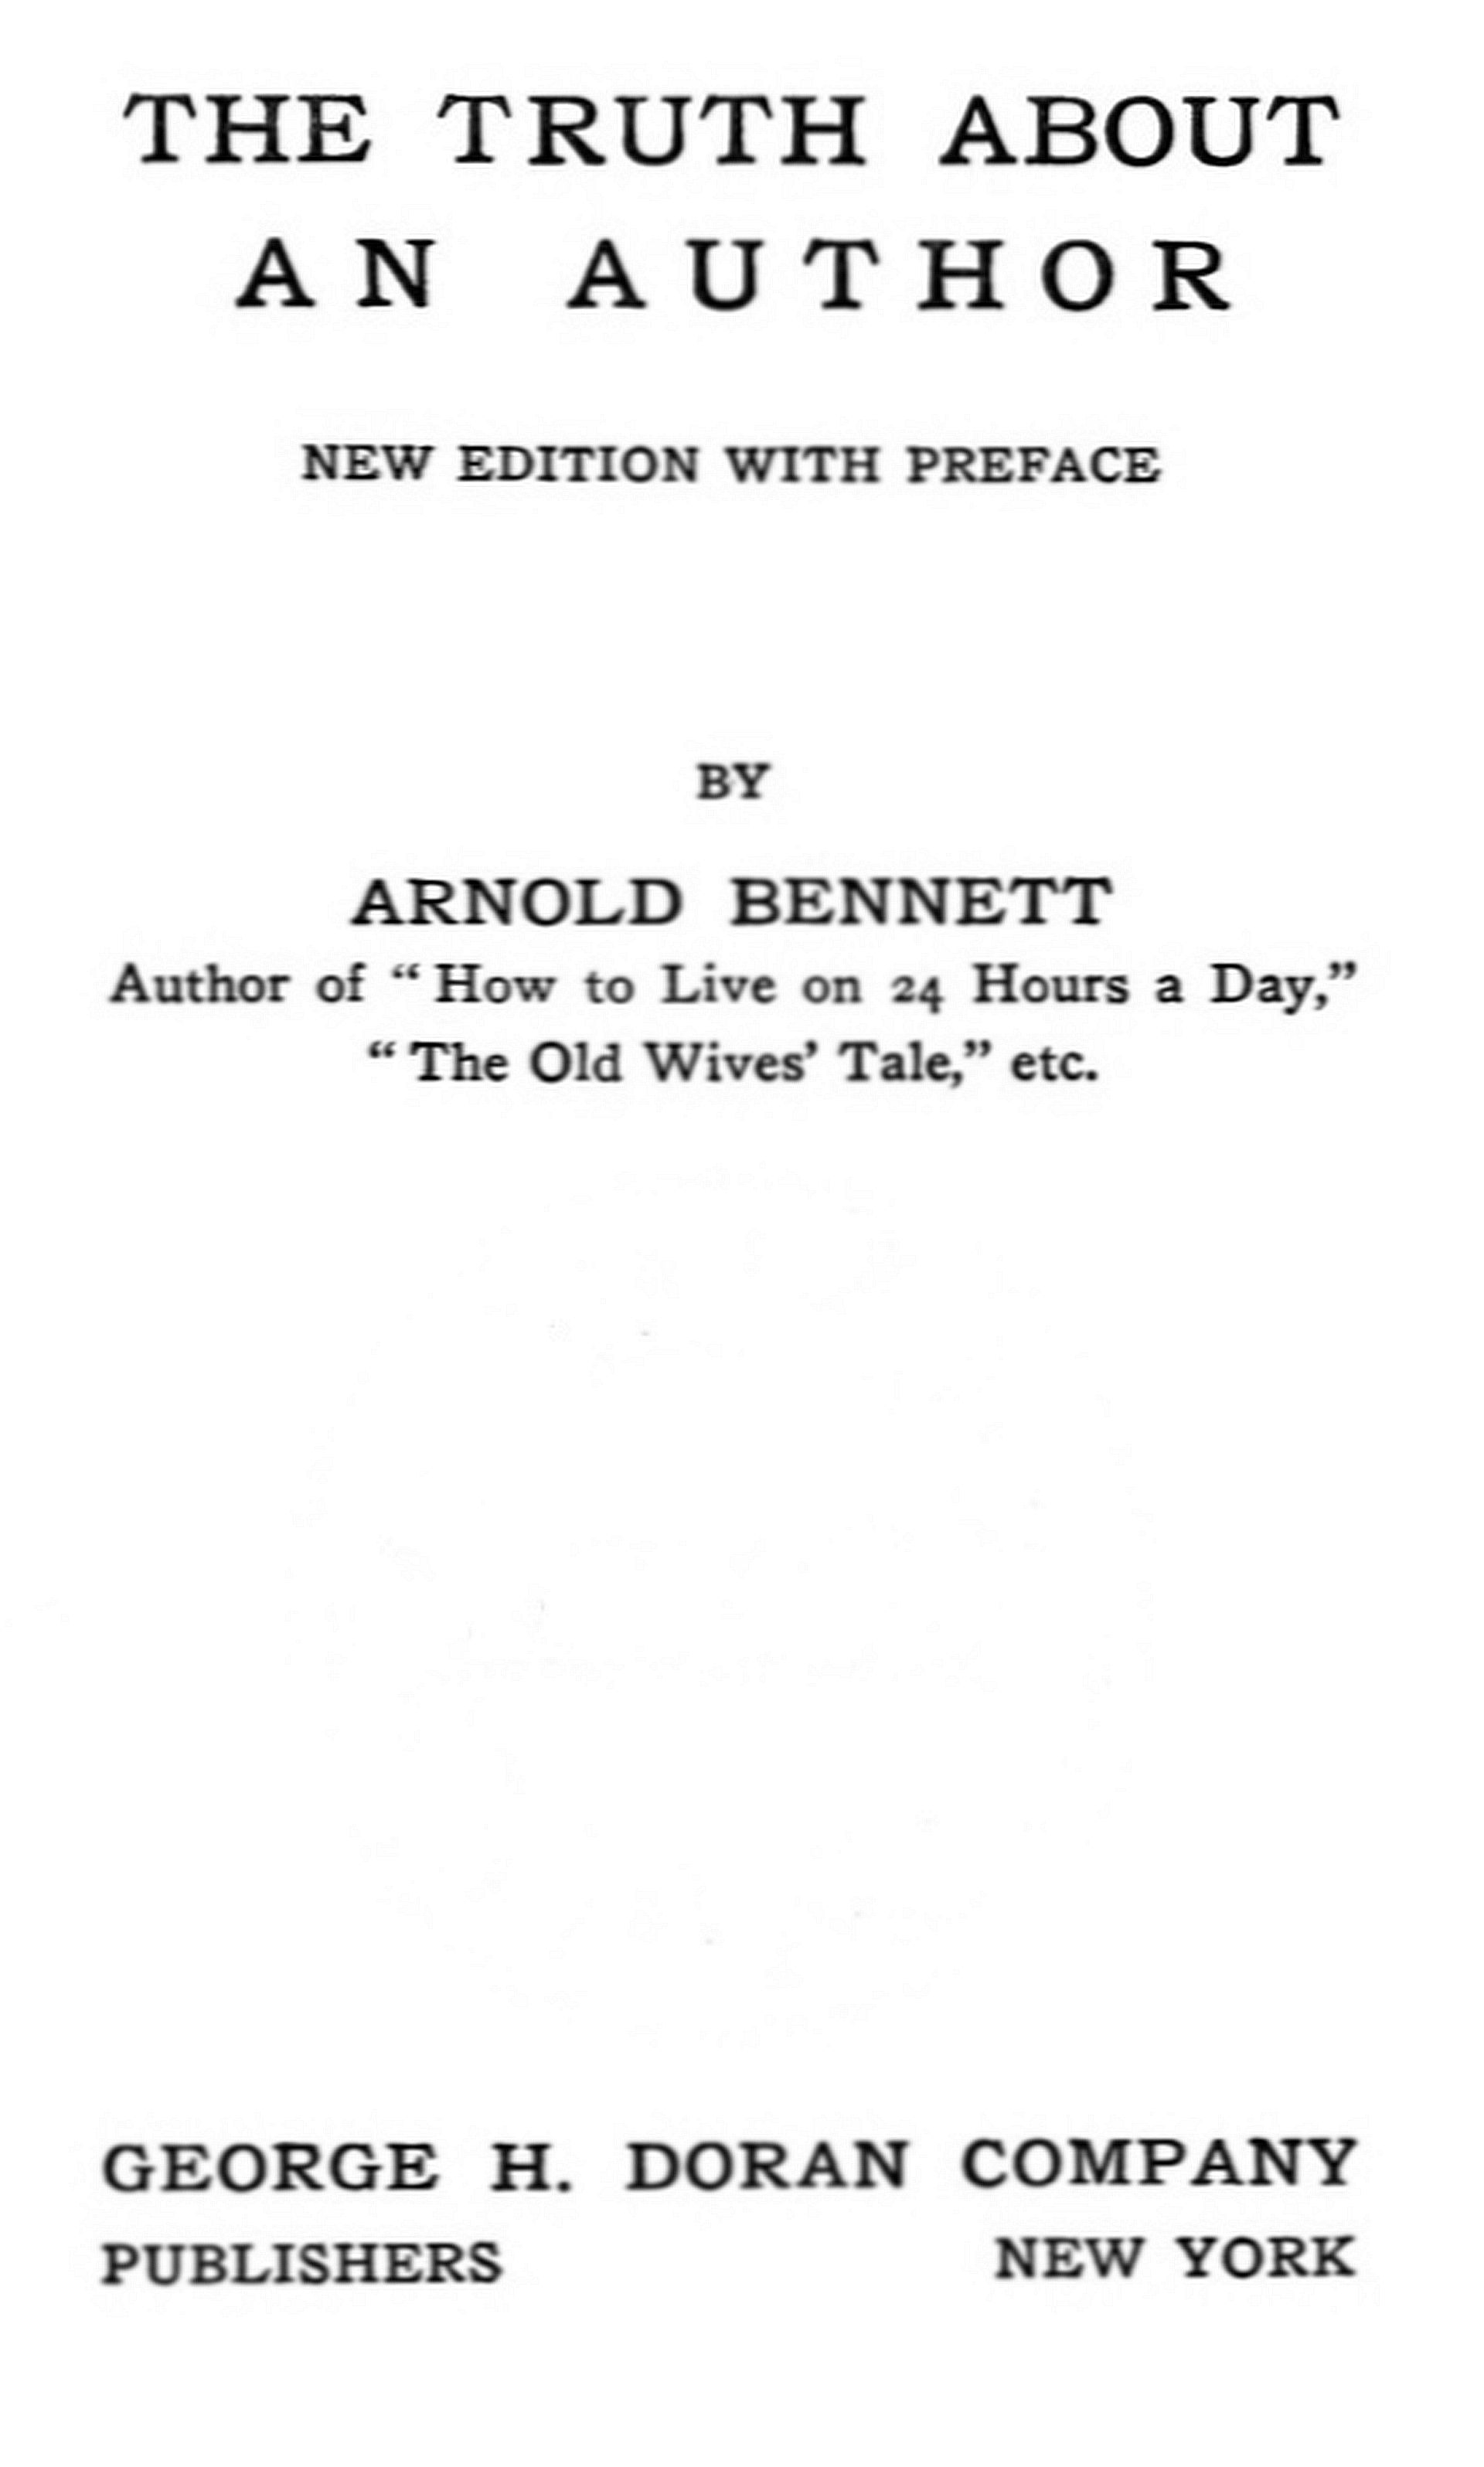 The Project Gutenberg eBook of The Truth about an Author, by Arnold Bennett. picture